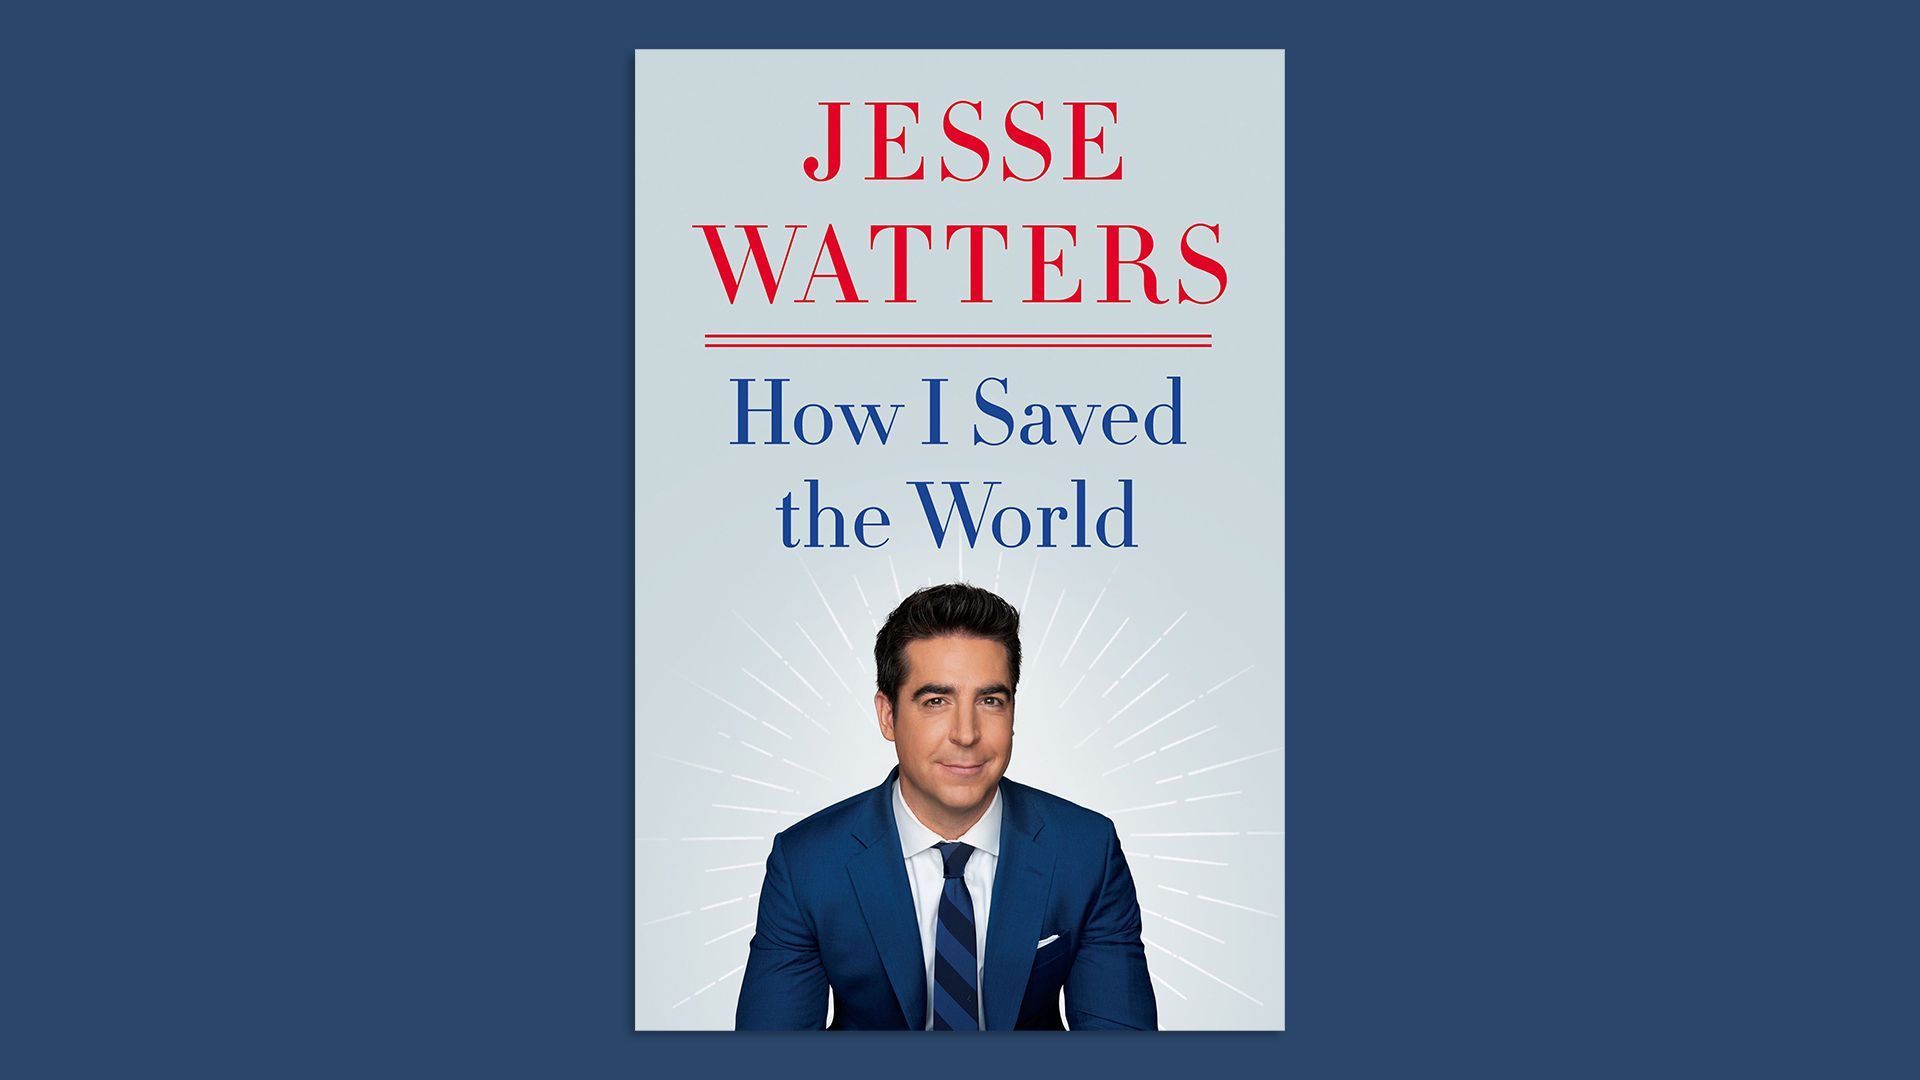 Fox News' Jesse Watters book cover